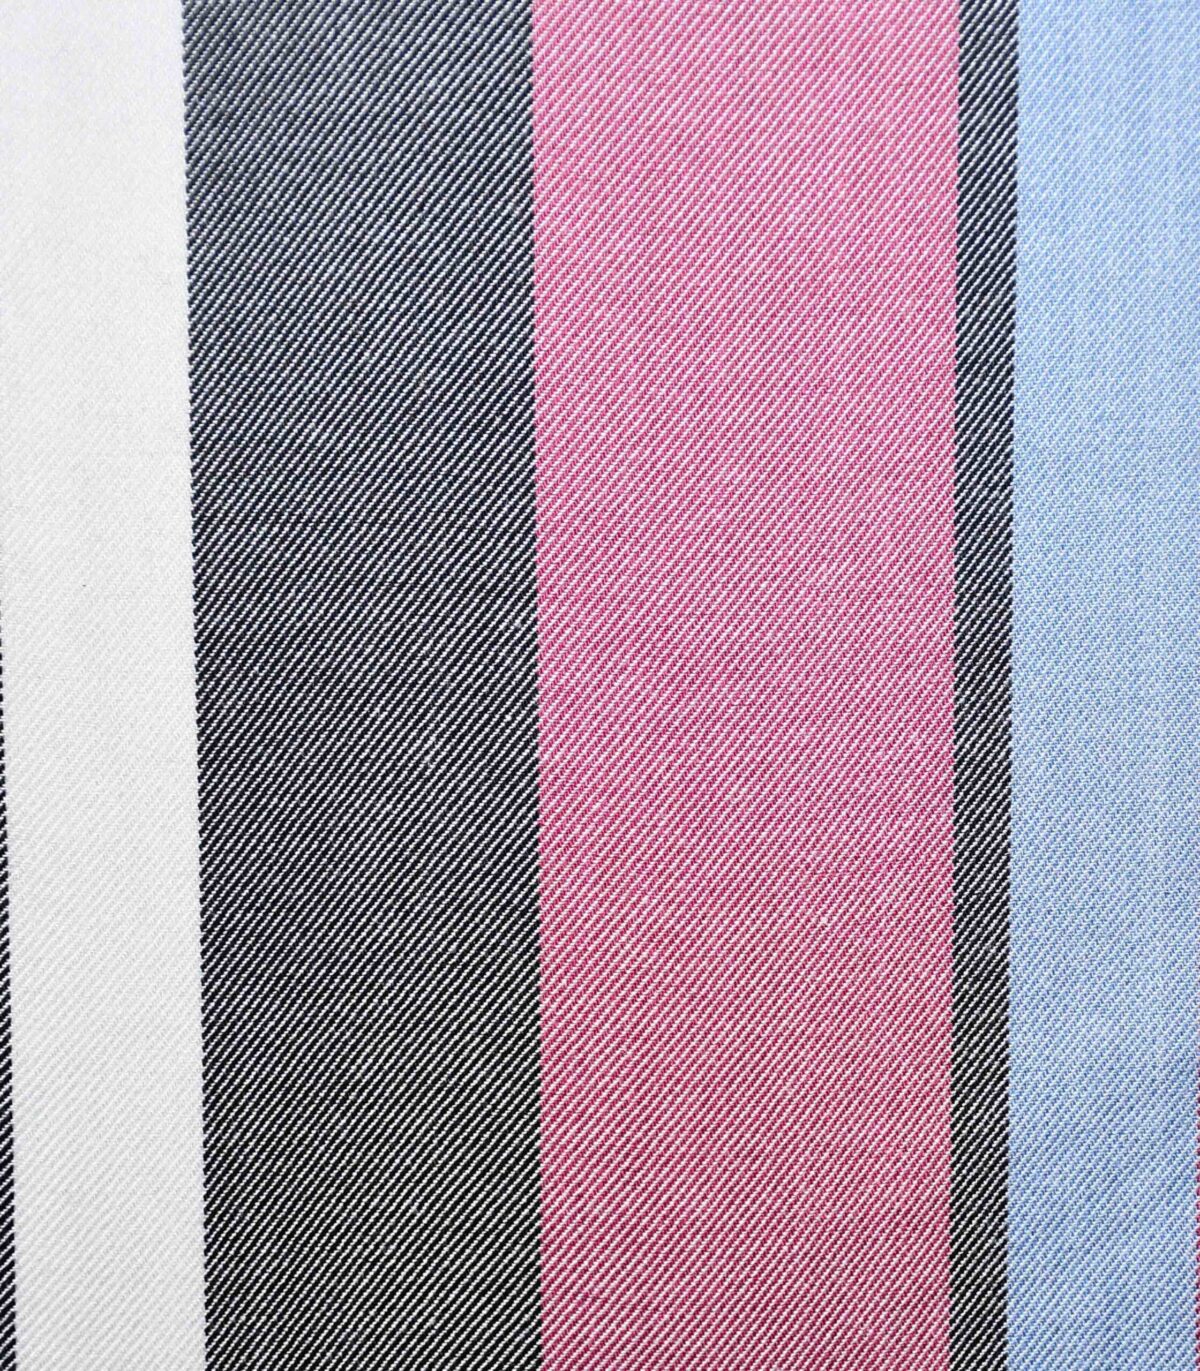 Yarn Dyed Pink & Multi Color Stripe Fabric